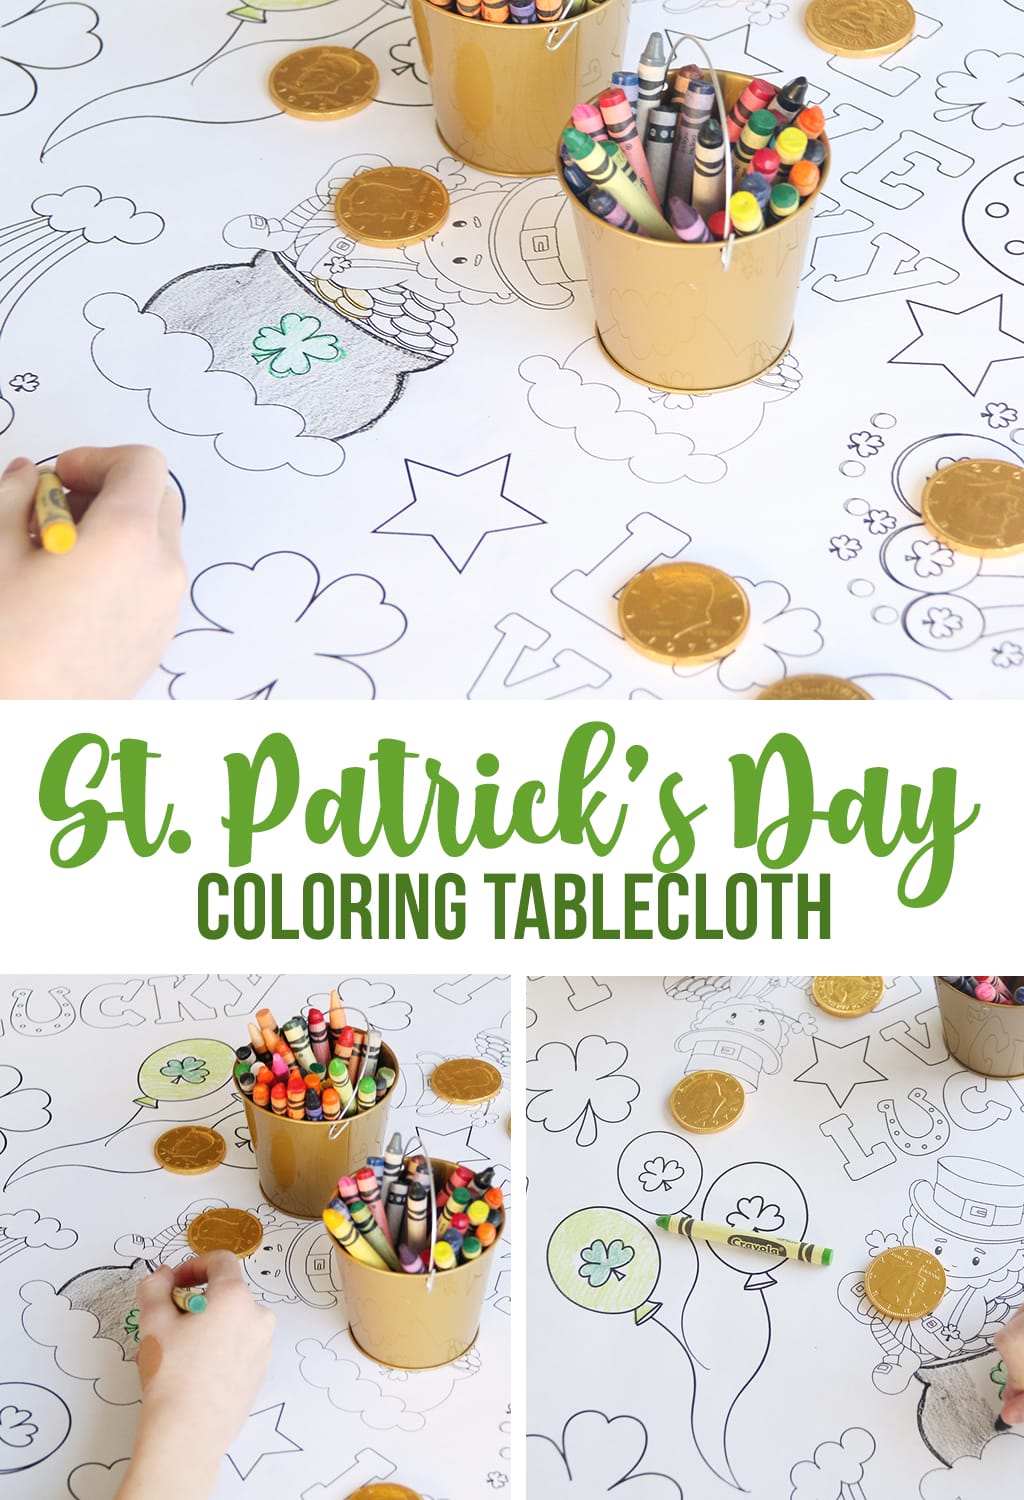 St. Patrick's Day Coloring Tablecloth. Printable tablecloth to color.